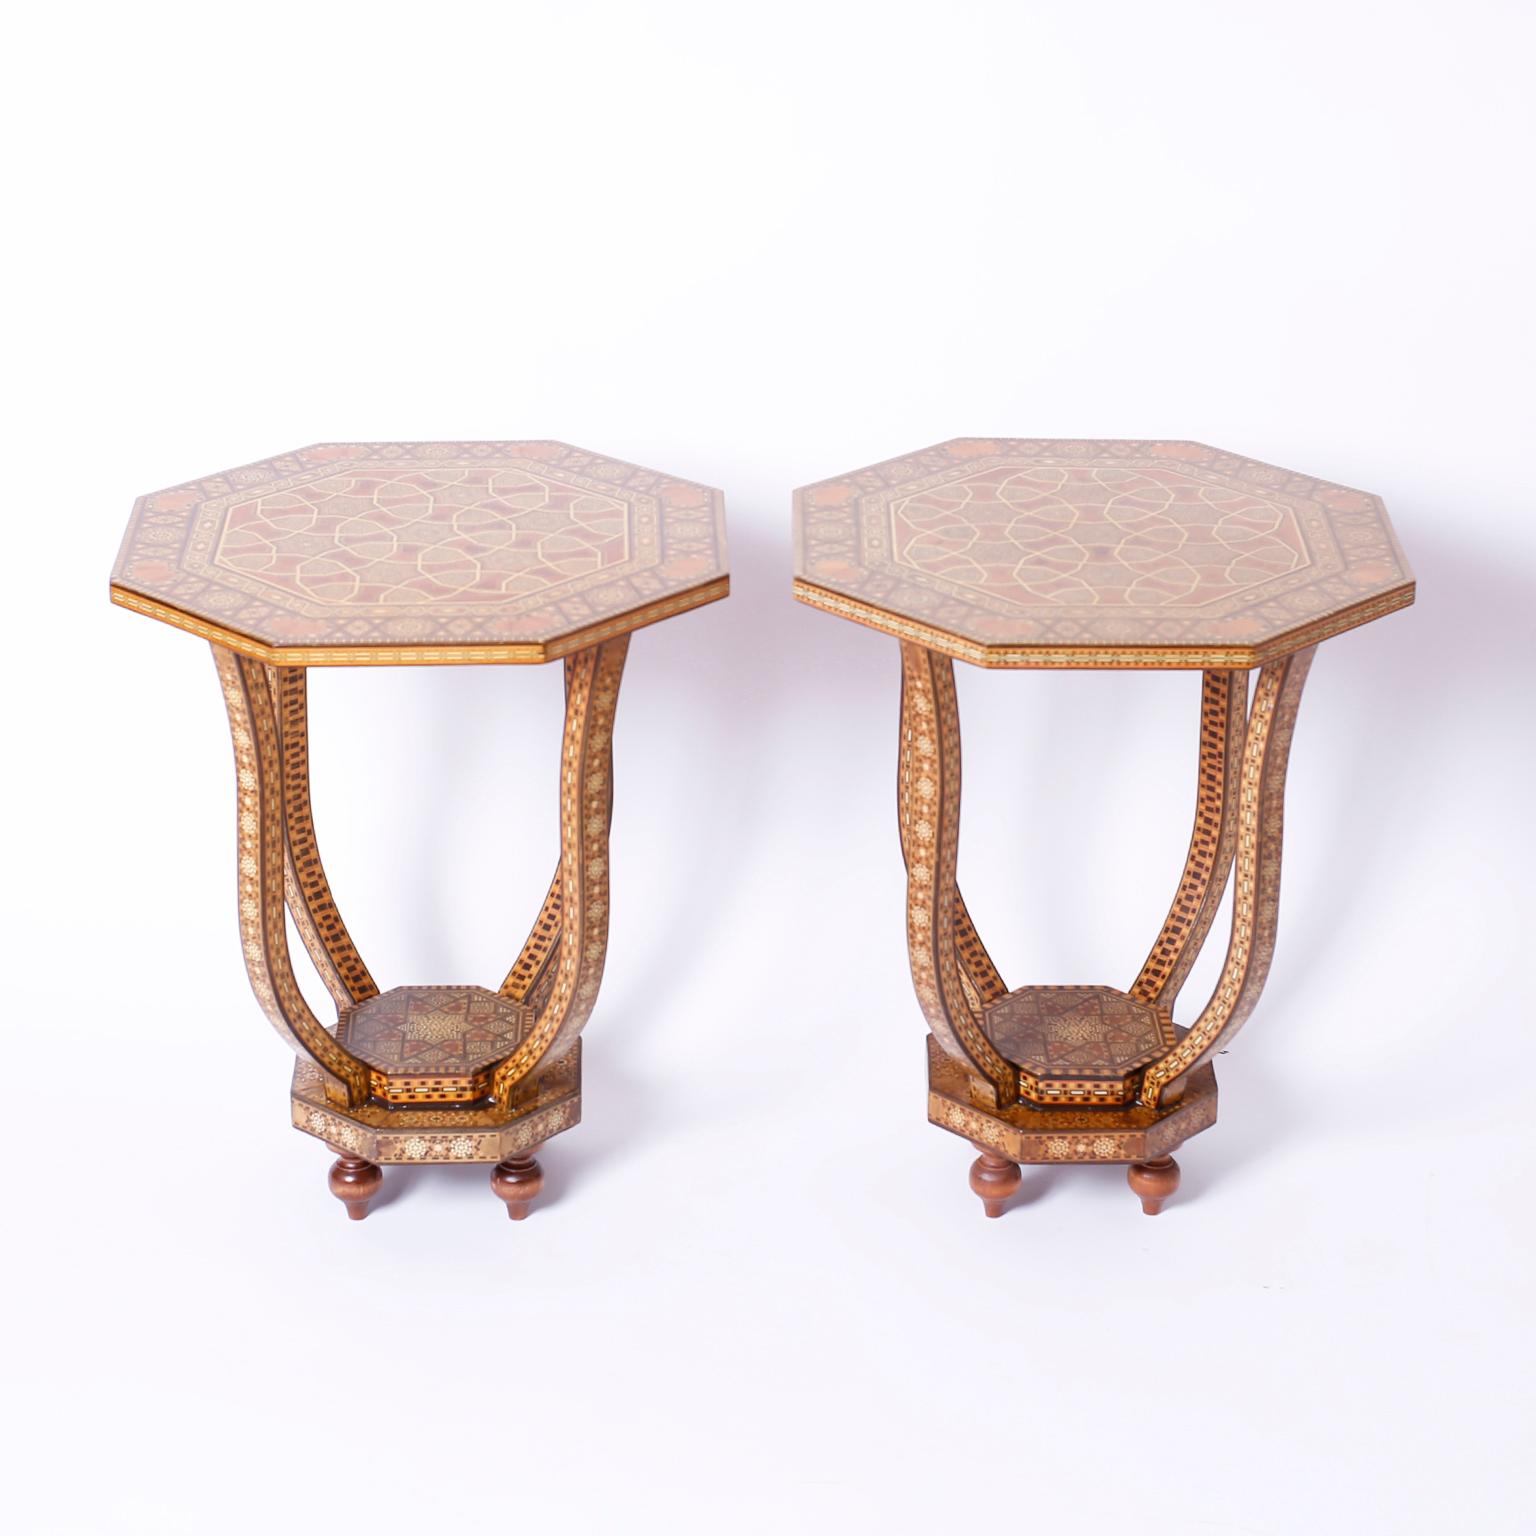 Sophisticated pair of Syrian tables with octagon tops intricately inlaid with marquetry, mother of pearl, bone and indigenous hardwoods over 4 curved and inlaid supports mounted on inlaid double plinth bases, over turned